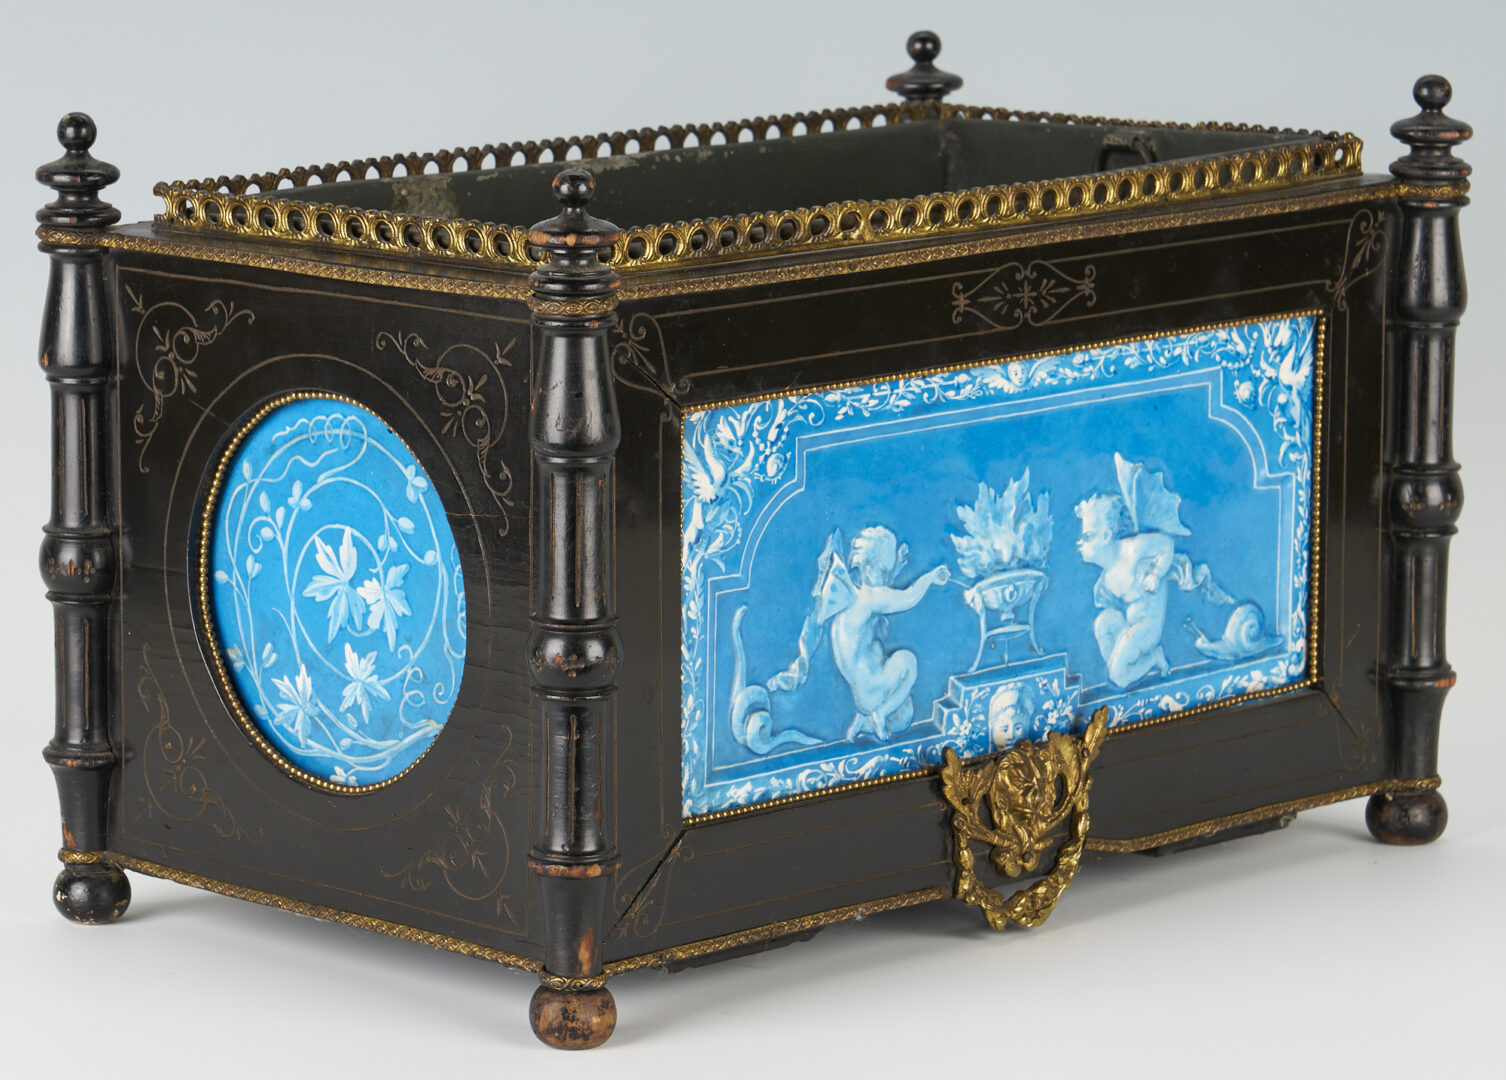 Lot 207: Aesthetic Movement Jardiniere with French Tiles